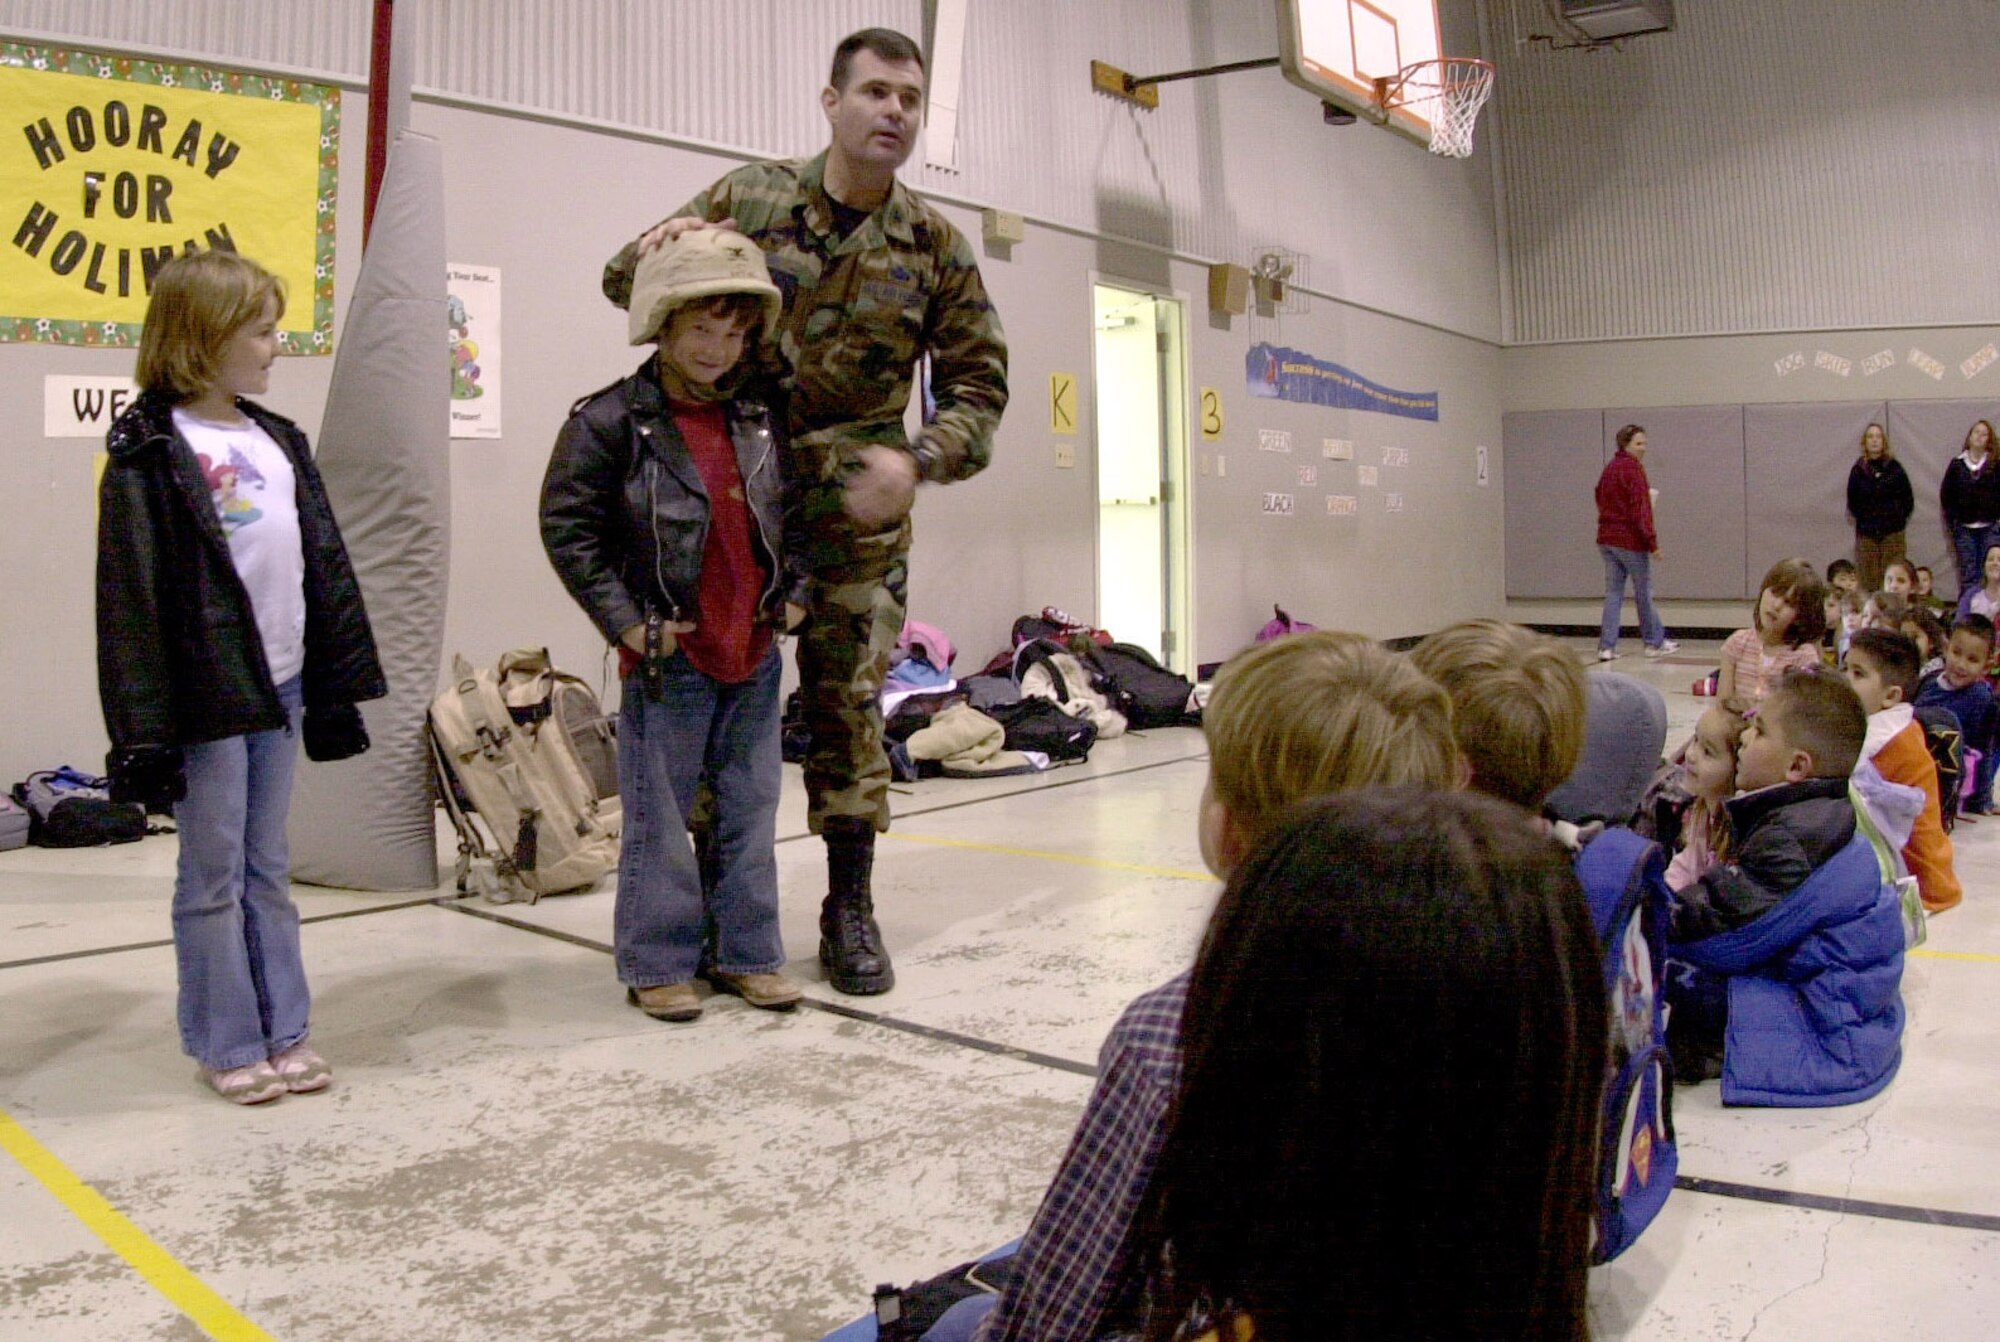 (Left): Col. Scott Bethel, 17th Training Wing commander, helps six-year-old Hunter Herd, a student at Holiman Elementary School, put on a desert camouflage uniform helmet. The student was one of a handful of school children that the commander invited to try out some of his deployment gear. "Our students need great role models in their lives, said Judy Bragg, Holiman’s principal. “To meet a high ranking hero and hear from him the importance of education, leadership, and American pride was a blessing," Judy Bragg, Holiman Elementary School principal said. Col. Bethel was invited as part of a joint program between the school and Paul Ann Baptist Church. Called Project Impact, the program aims to enhance the lives of the school children through special presentations and encouraging words from motivational speakers. (U.S. Air Force photo by Airman 1st Class Luis Loza Gutierrez)